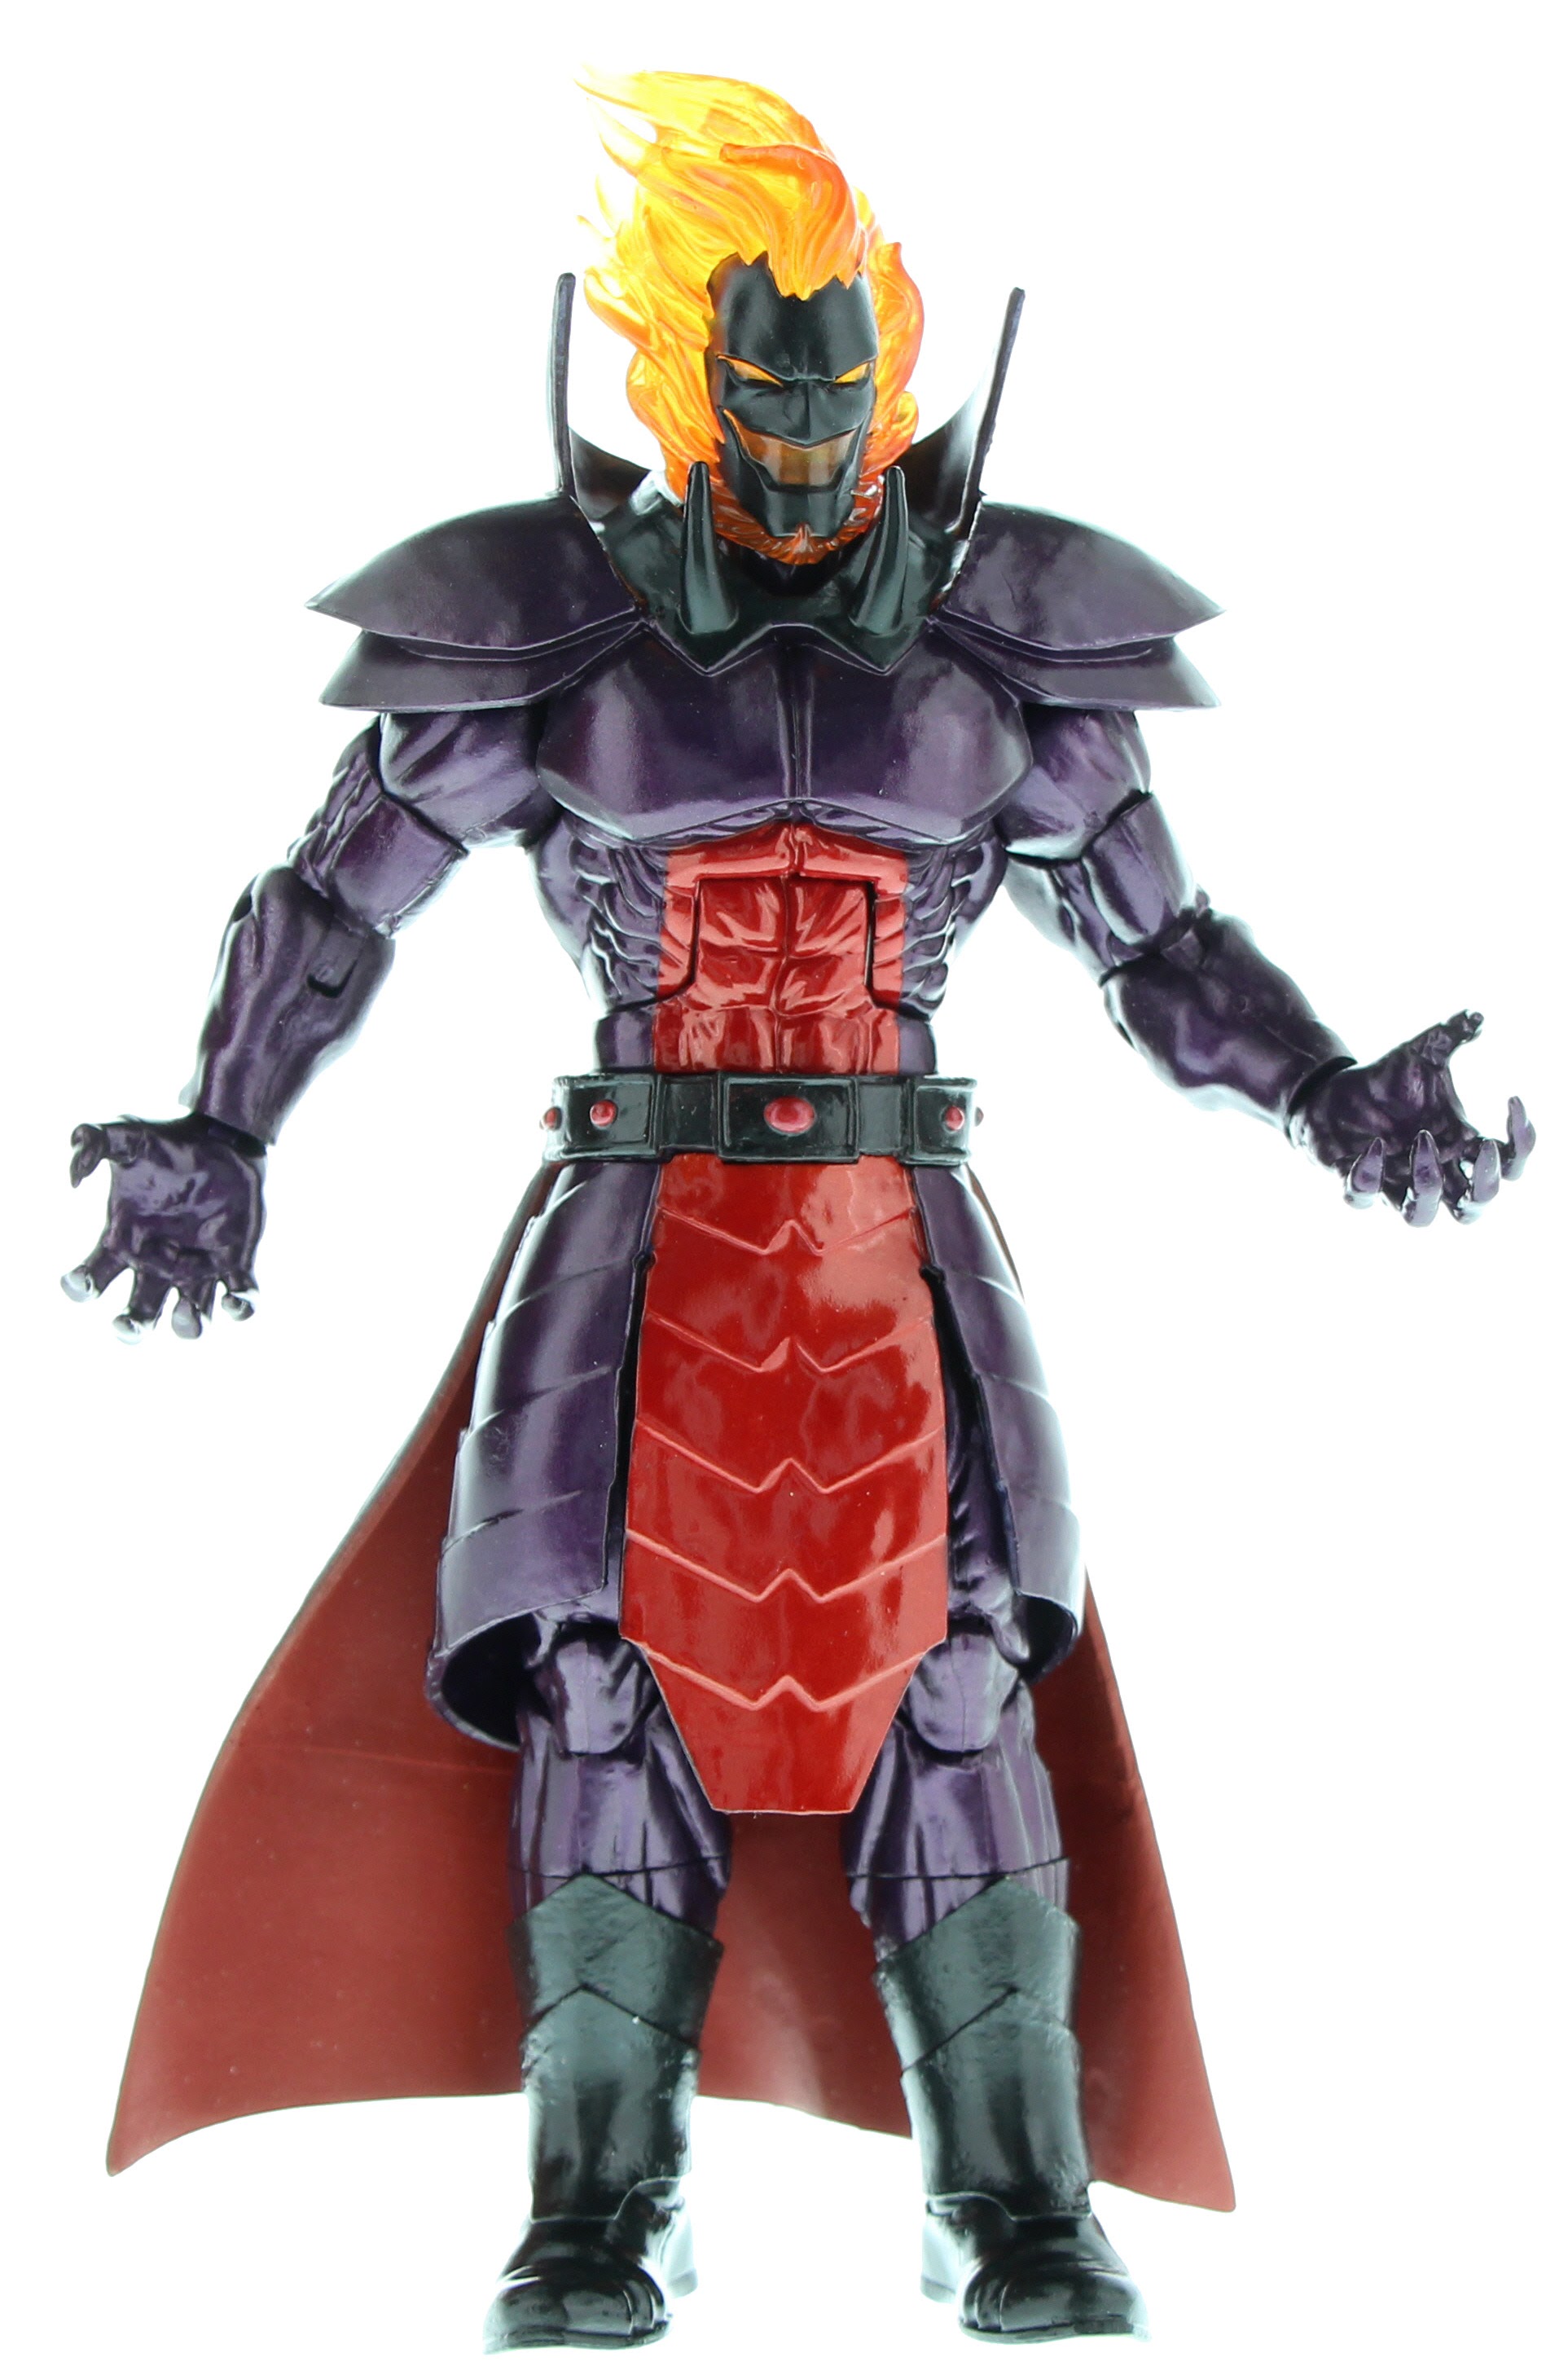 DS6InchDormammu Large 300DPI Large Batch of Hasbro Marvel & Star Wars Figure Images From Toy Fair